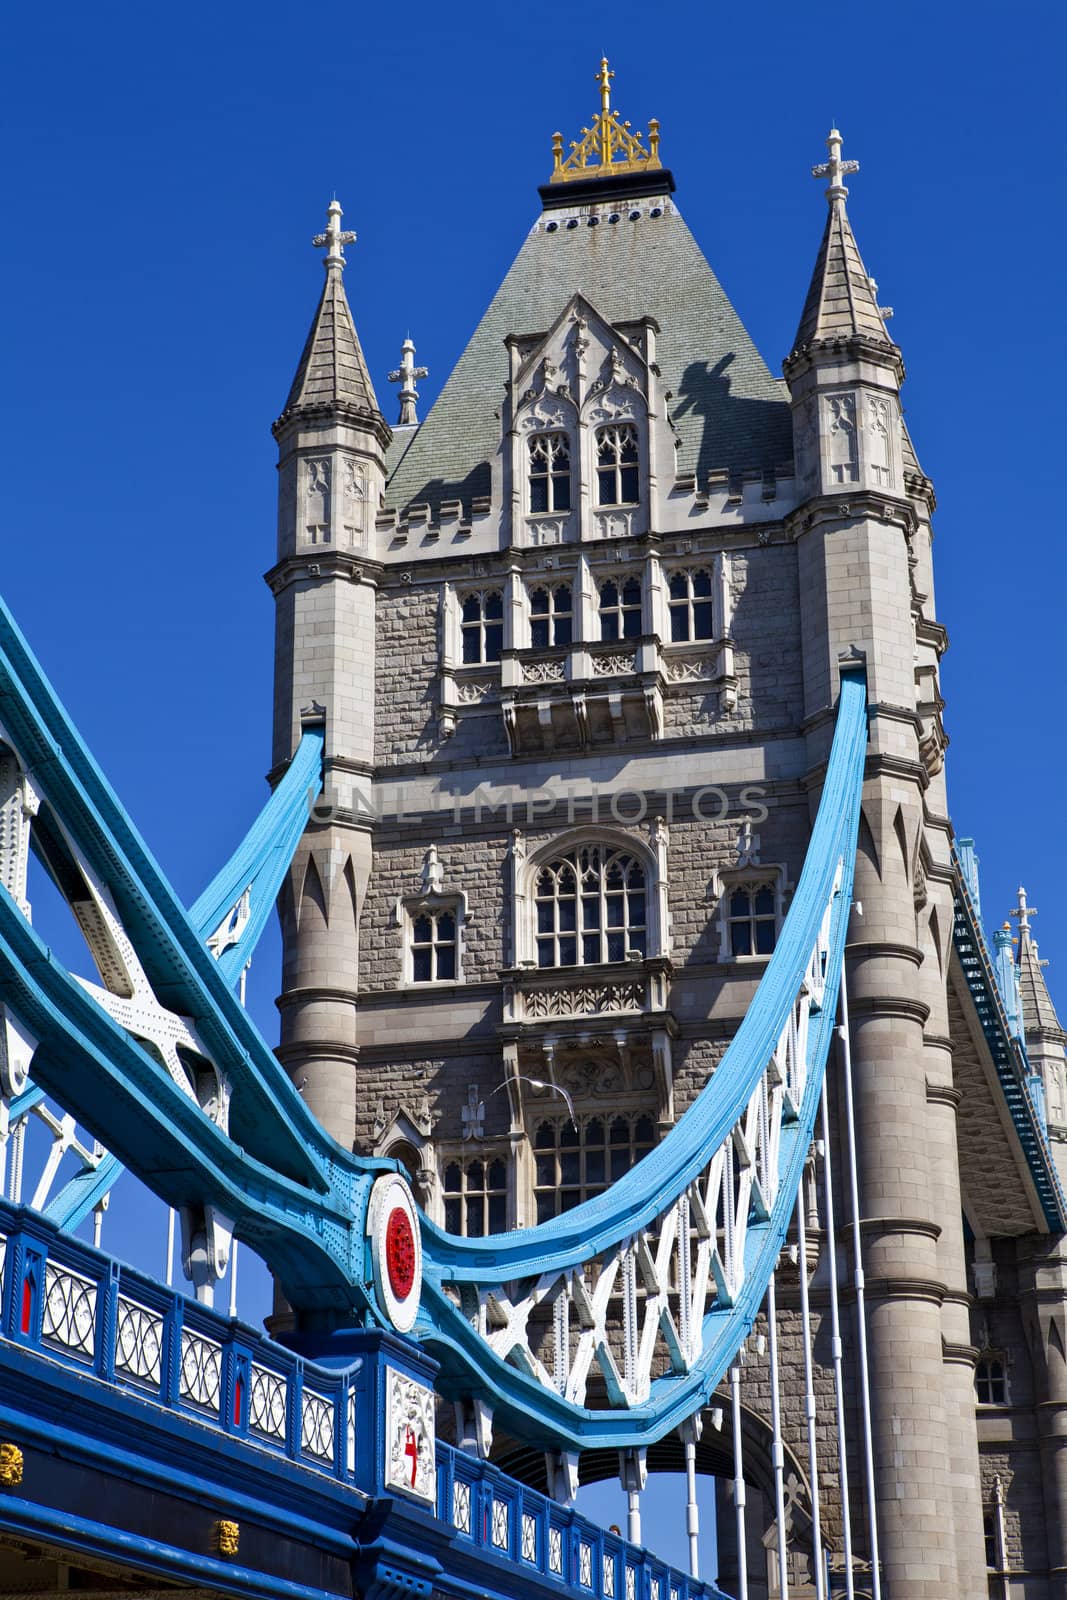 The magnificent Tower Bridge in London.